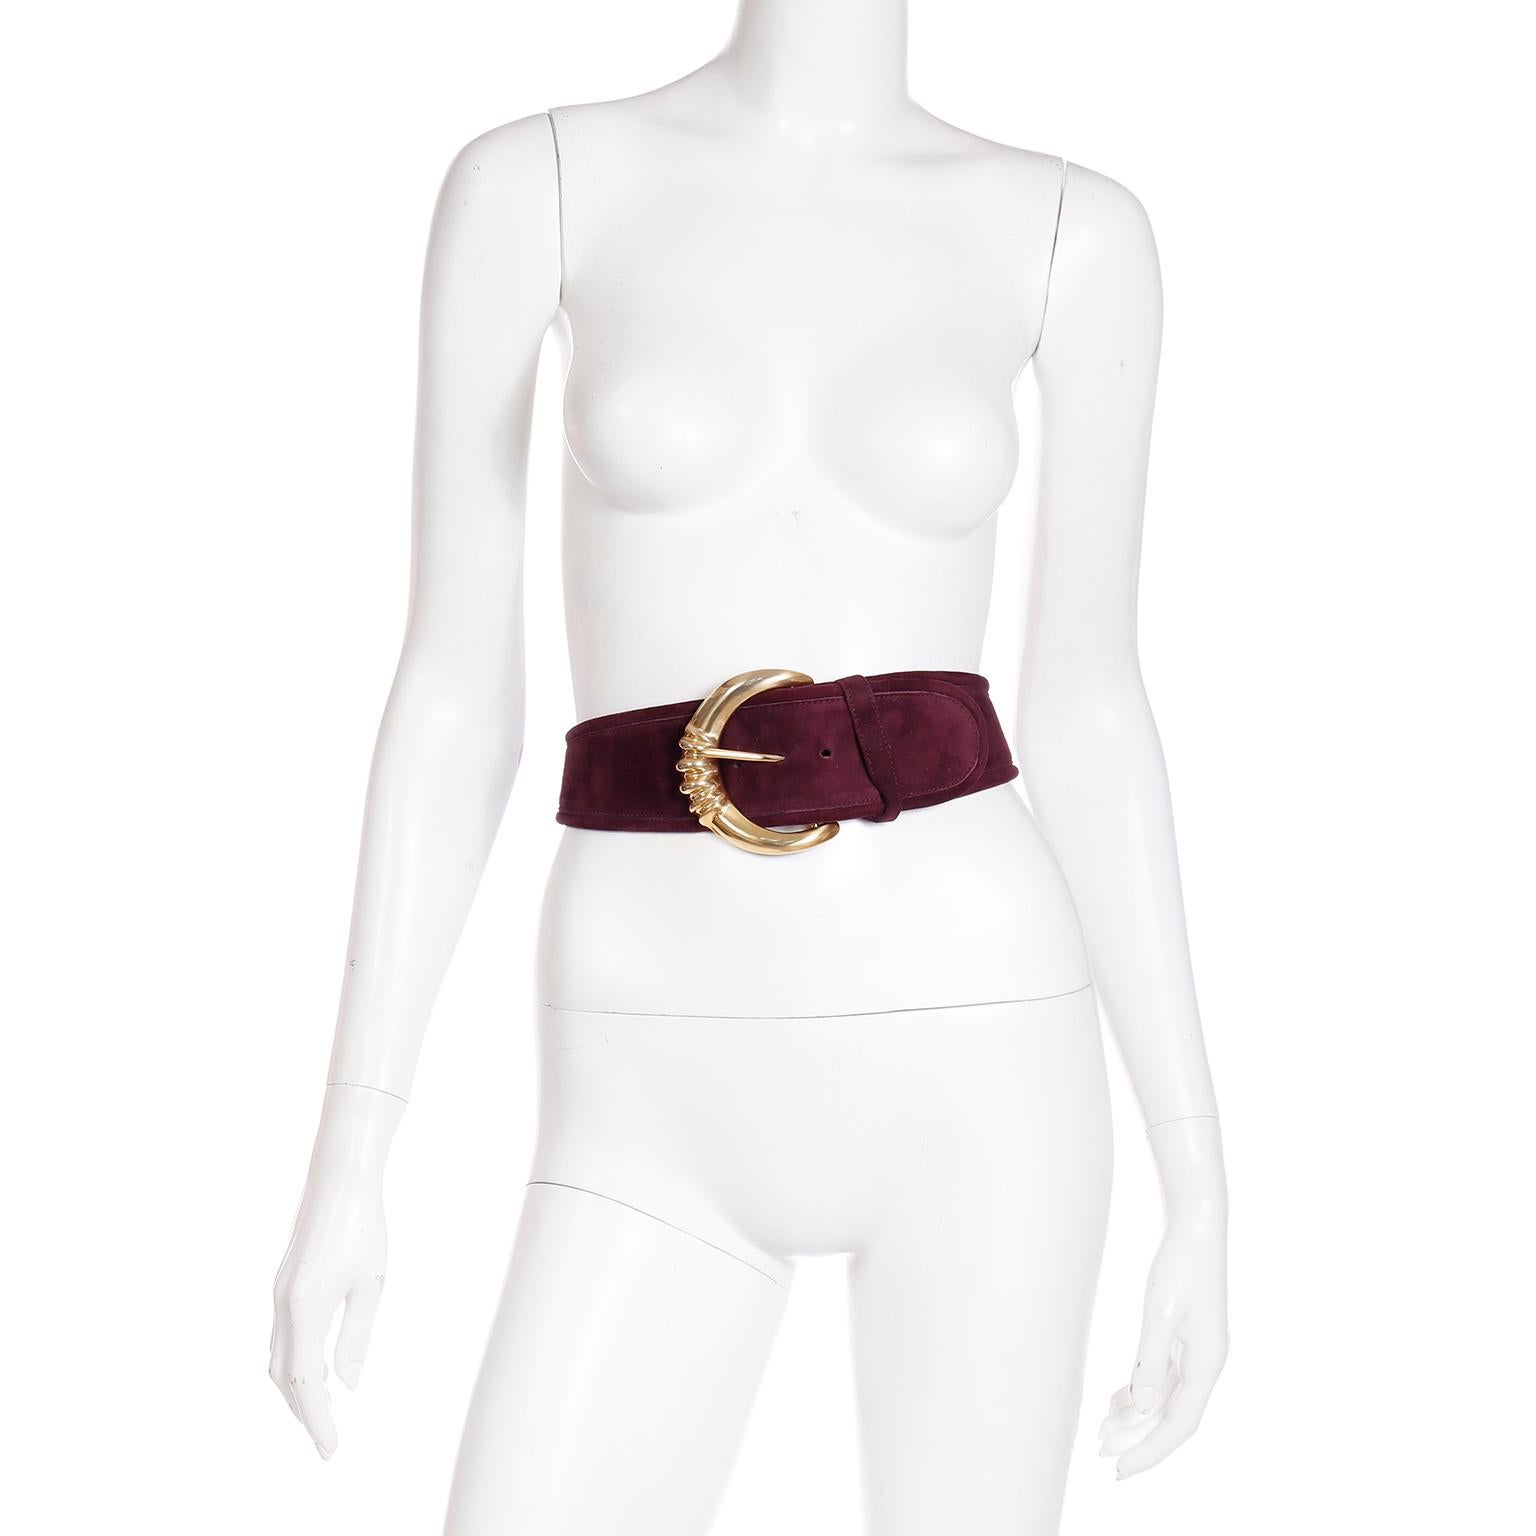 There is nothing quite like these vintage Donna Karan belts with Robert Lee Morris buckles! The quality is exceptional and we find that our clients love owning all of the different colors and styles available. Though he collaborated with several